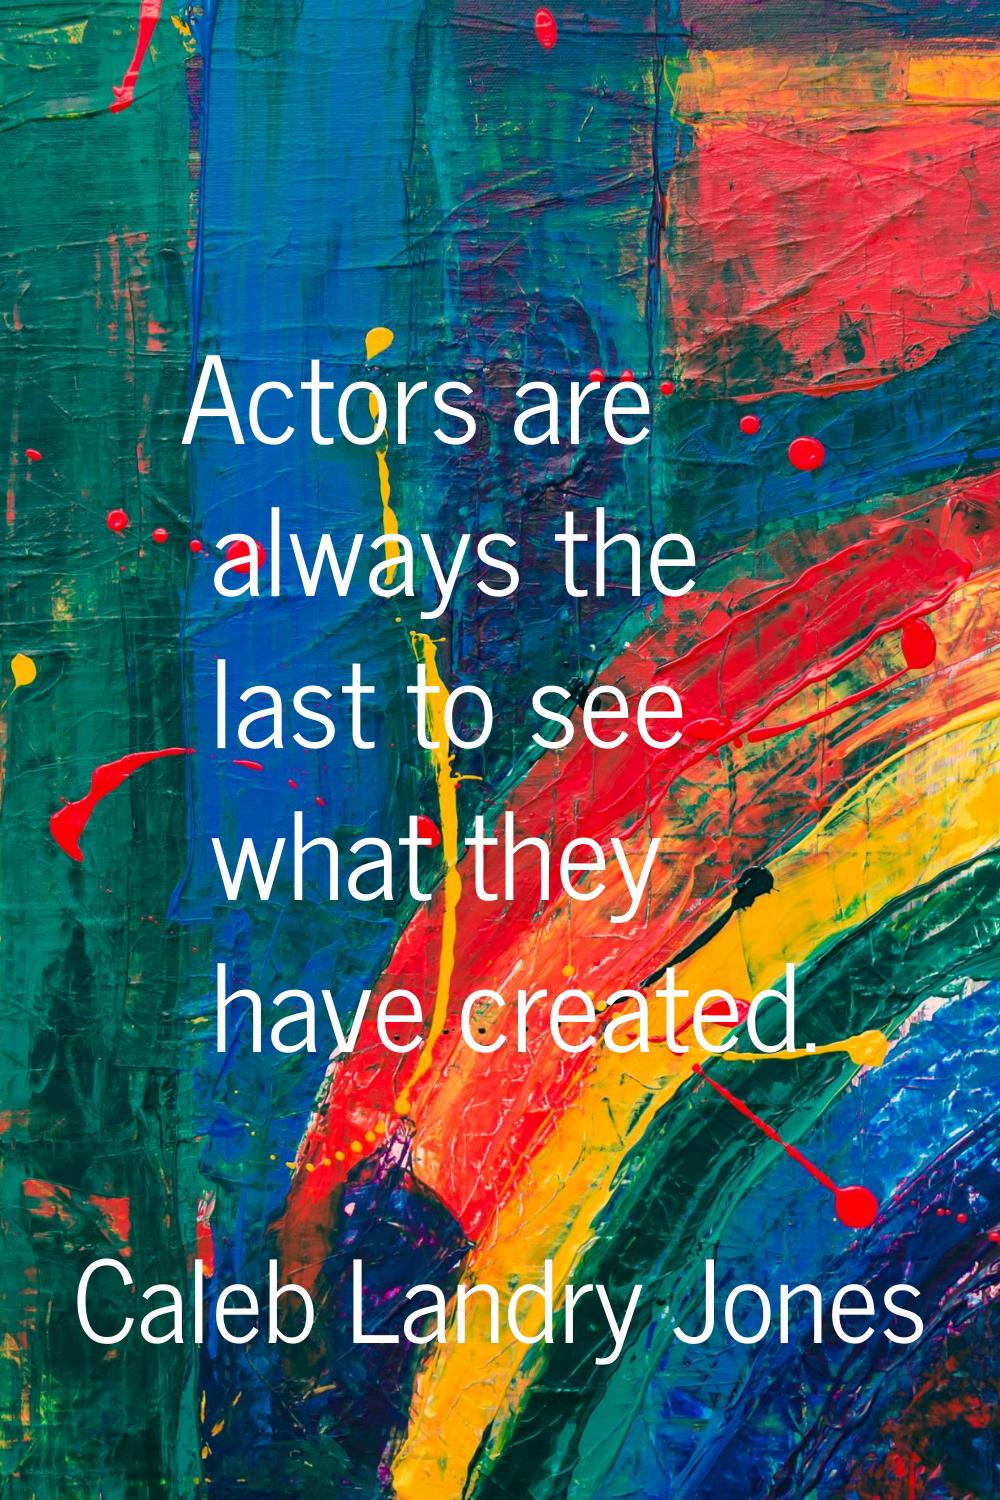 Actors are always the last to see what they have created.